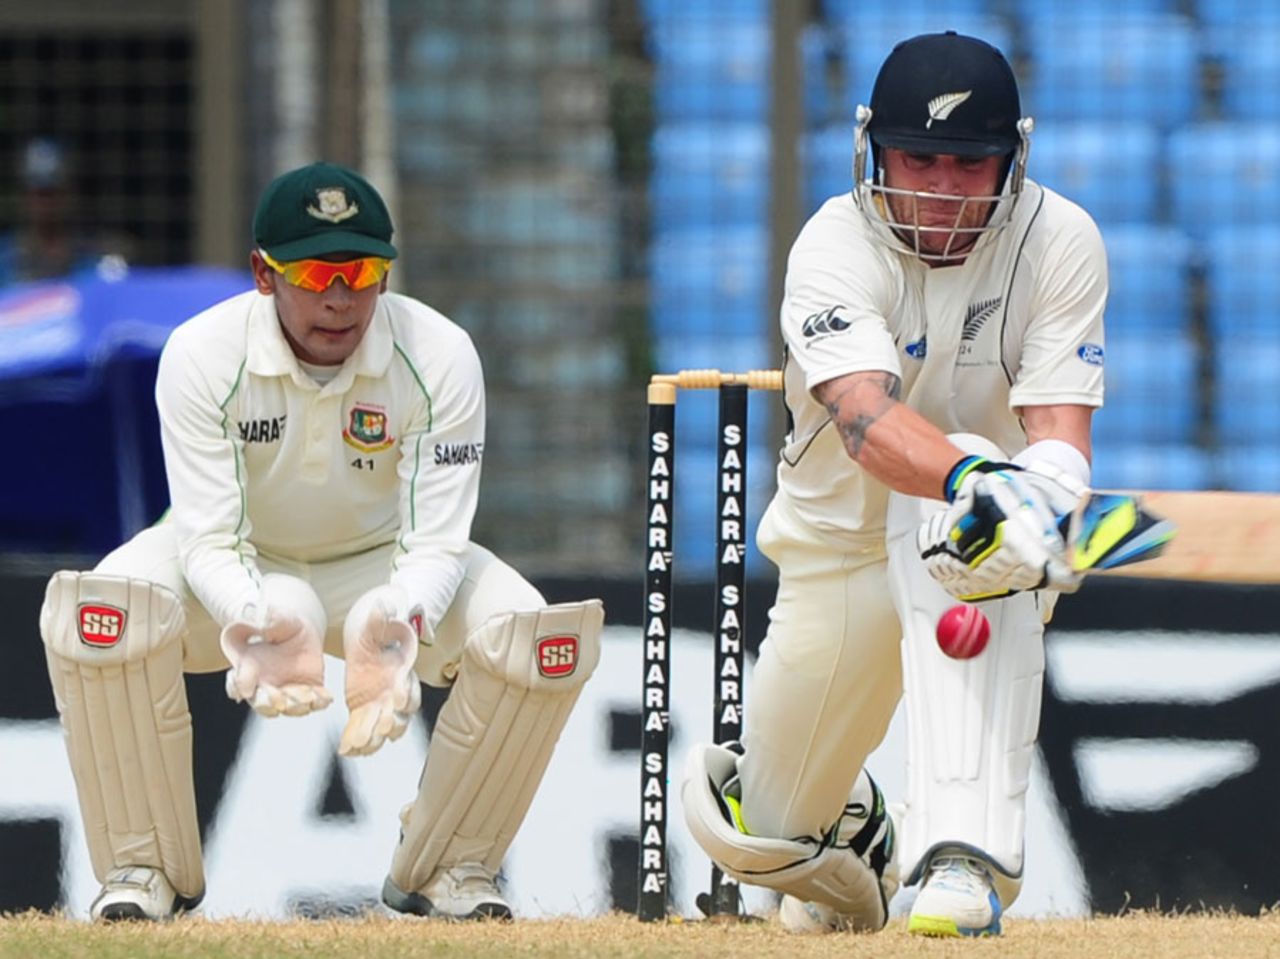 Brendon McCullum added 50 runs with Ross Taylor for the fourth wicket, Bangladesh v New Zealand, 1st Test, 5th day, Chittagong, October 13, 2003